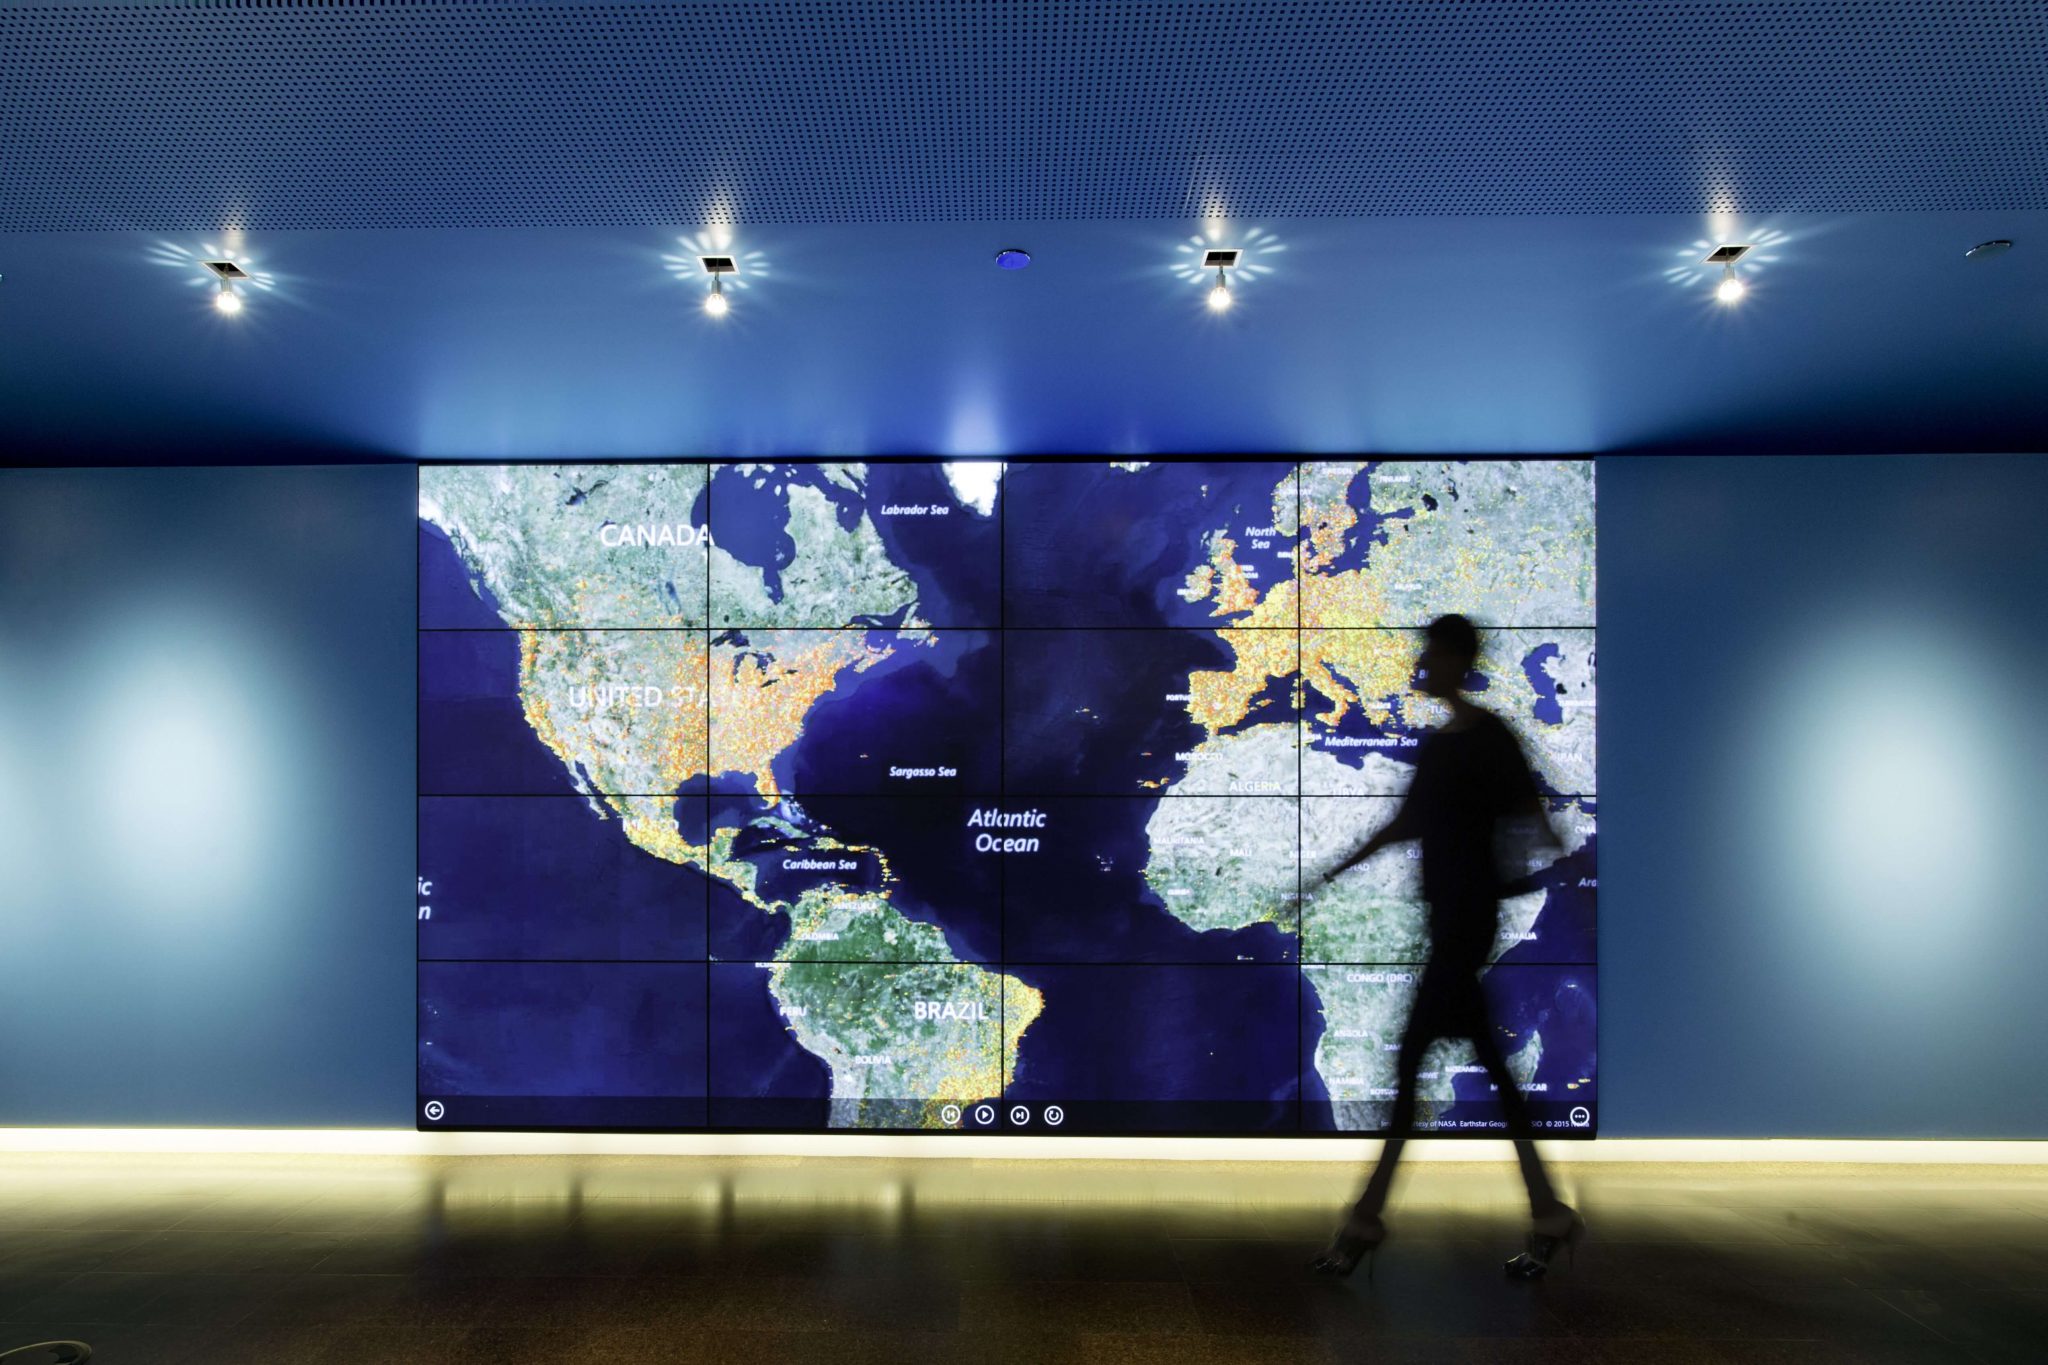 Silhouette of a person walking in front of an enlarged map of North, Central, and South America, Europe, and Africa.